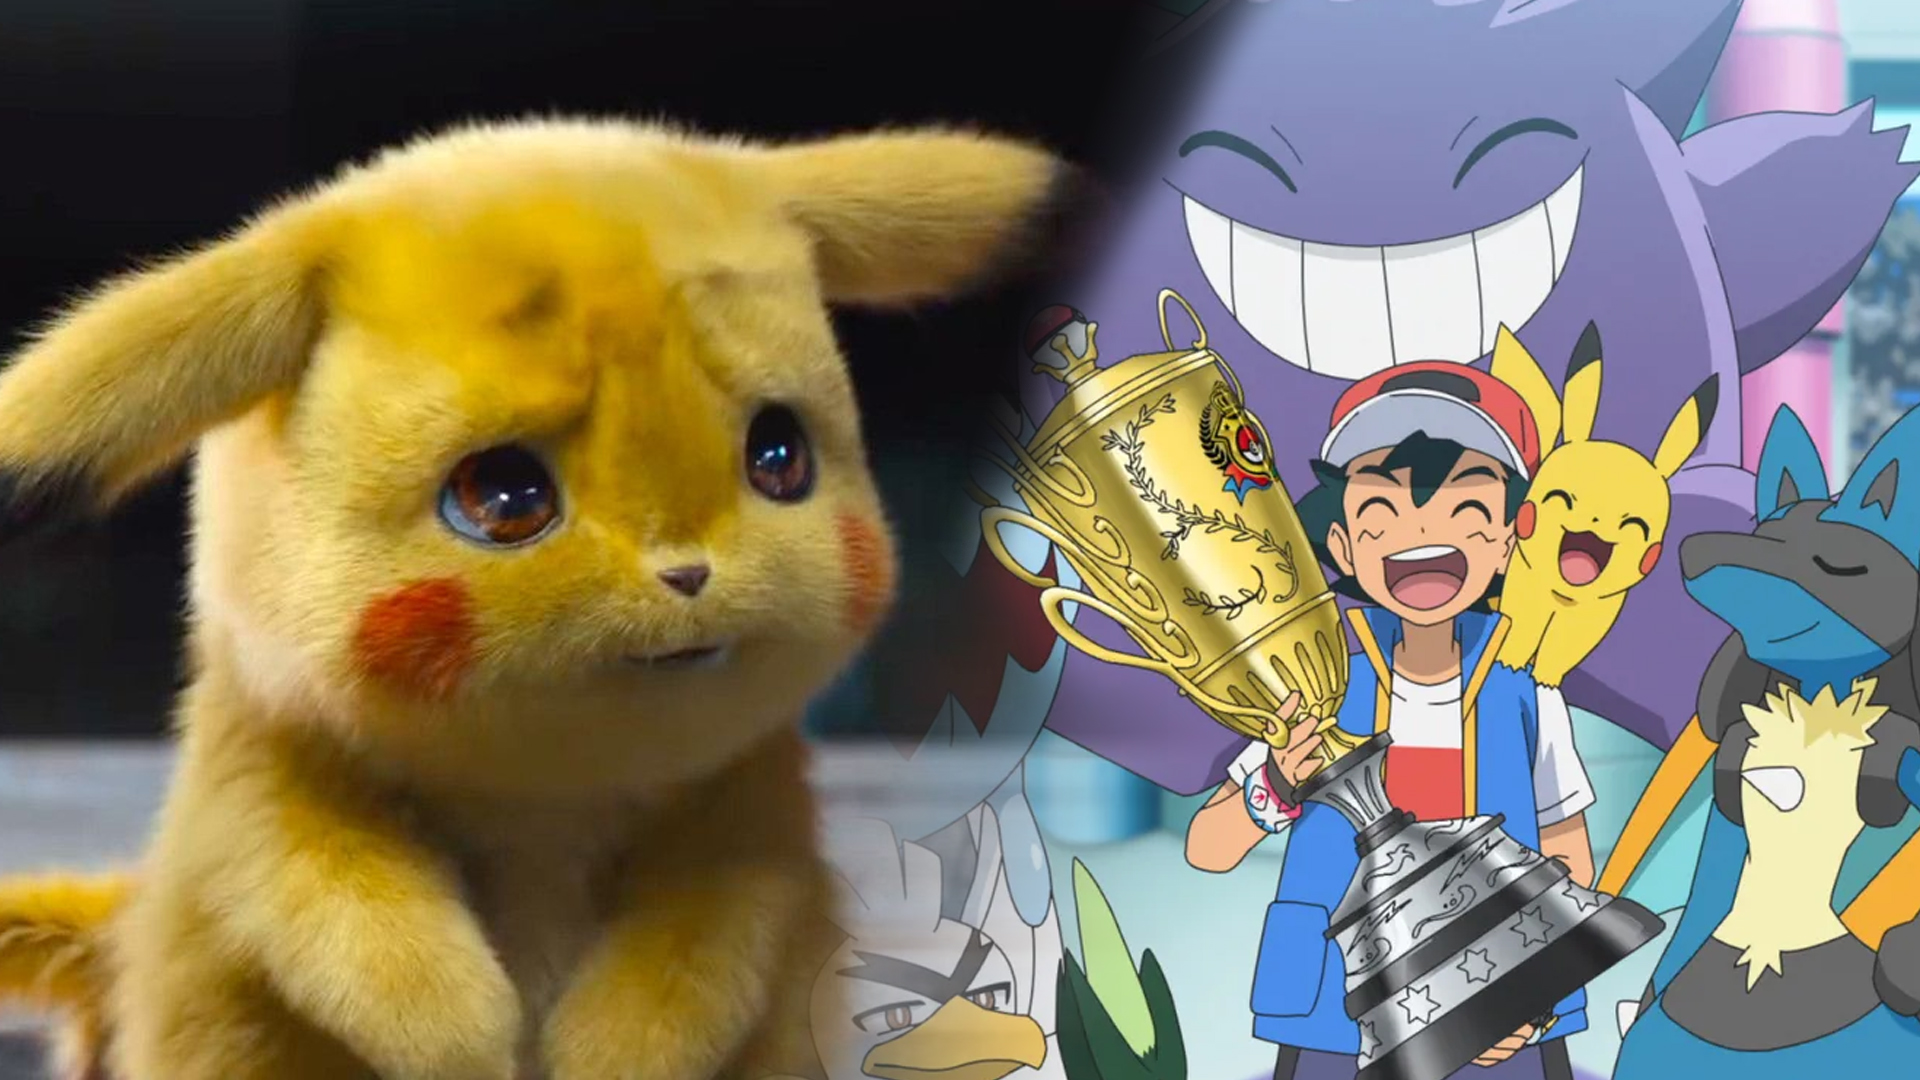 A Memory Of Lifetime As Ash And Pikachu's Journey Ends In Pokemon After 25  Long Years